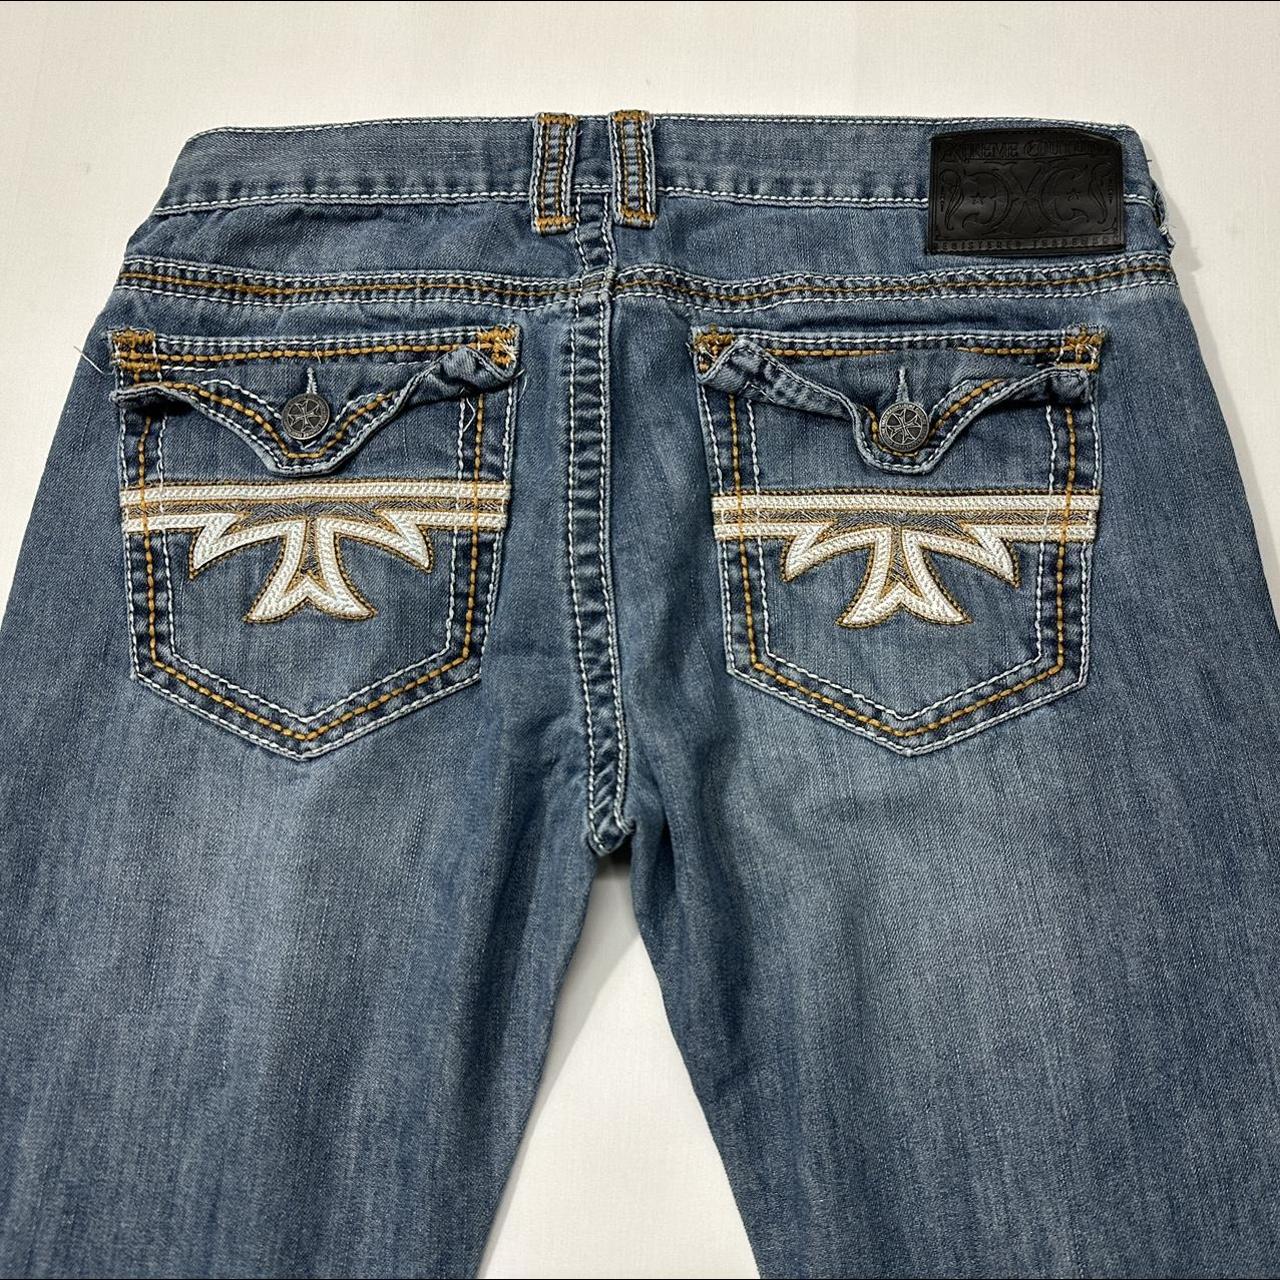 Xtreme Couture Jeans Y2K Xtreme Couture Embroidered... - Depop